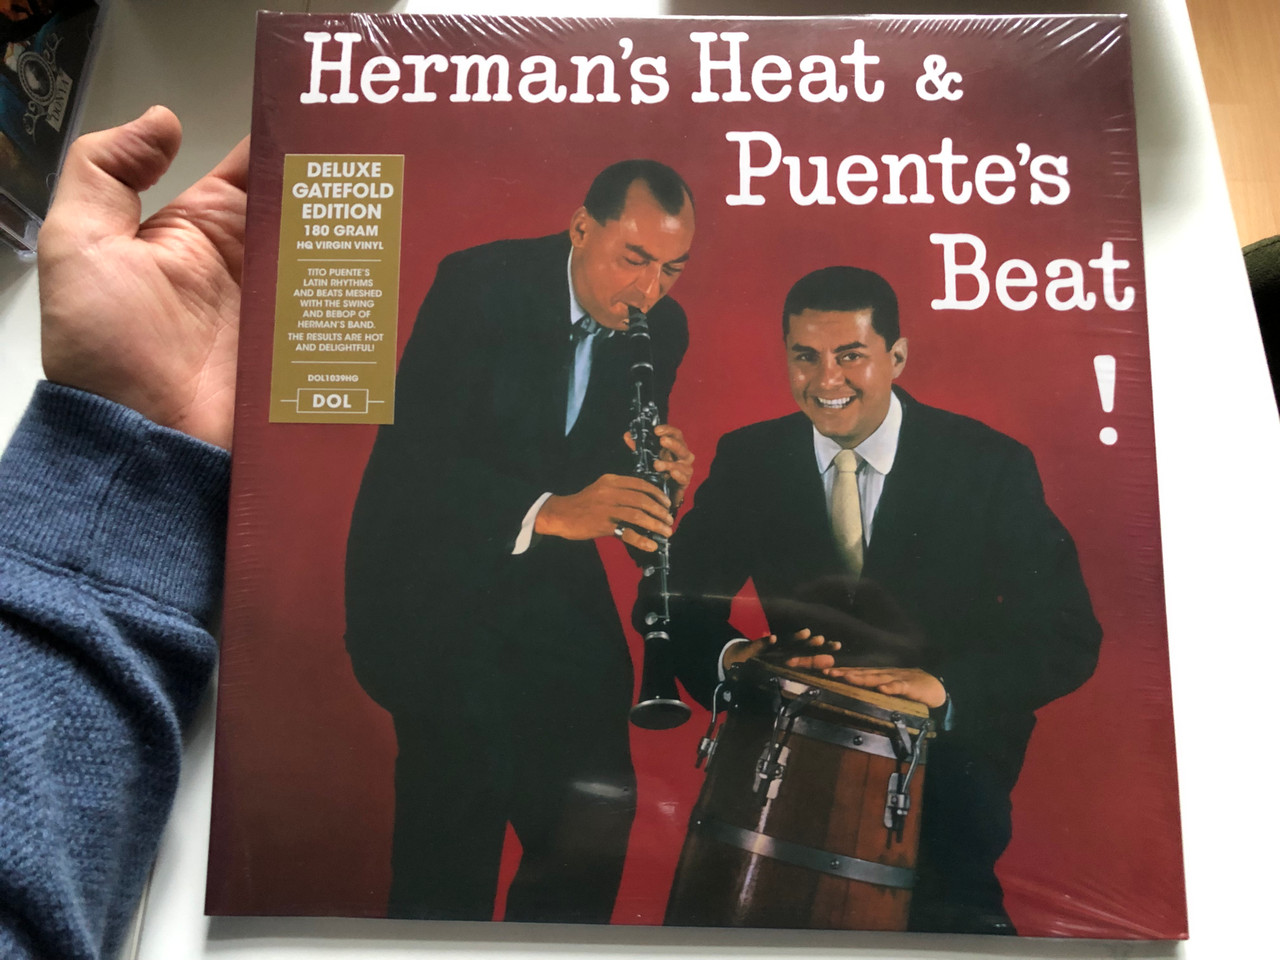 https://cdn10.bigcommerce.com/s-62bdpkt7pb/products/0/images/226526/Hermans_Heat_Puentes_Beat_Deluxe_Gatefold_Edition_180_Gram_HQ_Virgin_Vinyl_Tito_Puentes_Latin_Rhythms_And_Beats_Meshed_With_The_Swing_And_Bebop_Of_Hermans_Band._The_Results_Are_Hot_A_1__77815.1651656369.1280.1280.JPG?c=2&_gl=1*4y5d49*_ga*MjA2NTIxMjE2MC4xNTkwNTEyNTMy*_ga_WS2VZYPC6G*MTY1MTY1NjA1Ni4zODIuMS4xNjUxNjU2MTM2LjUx